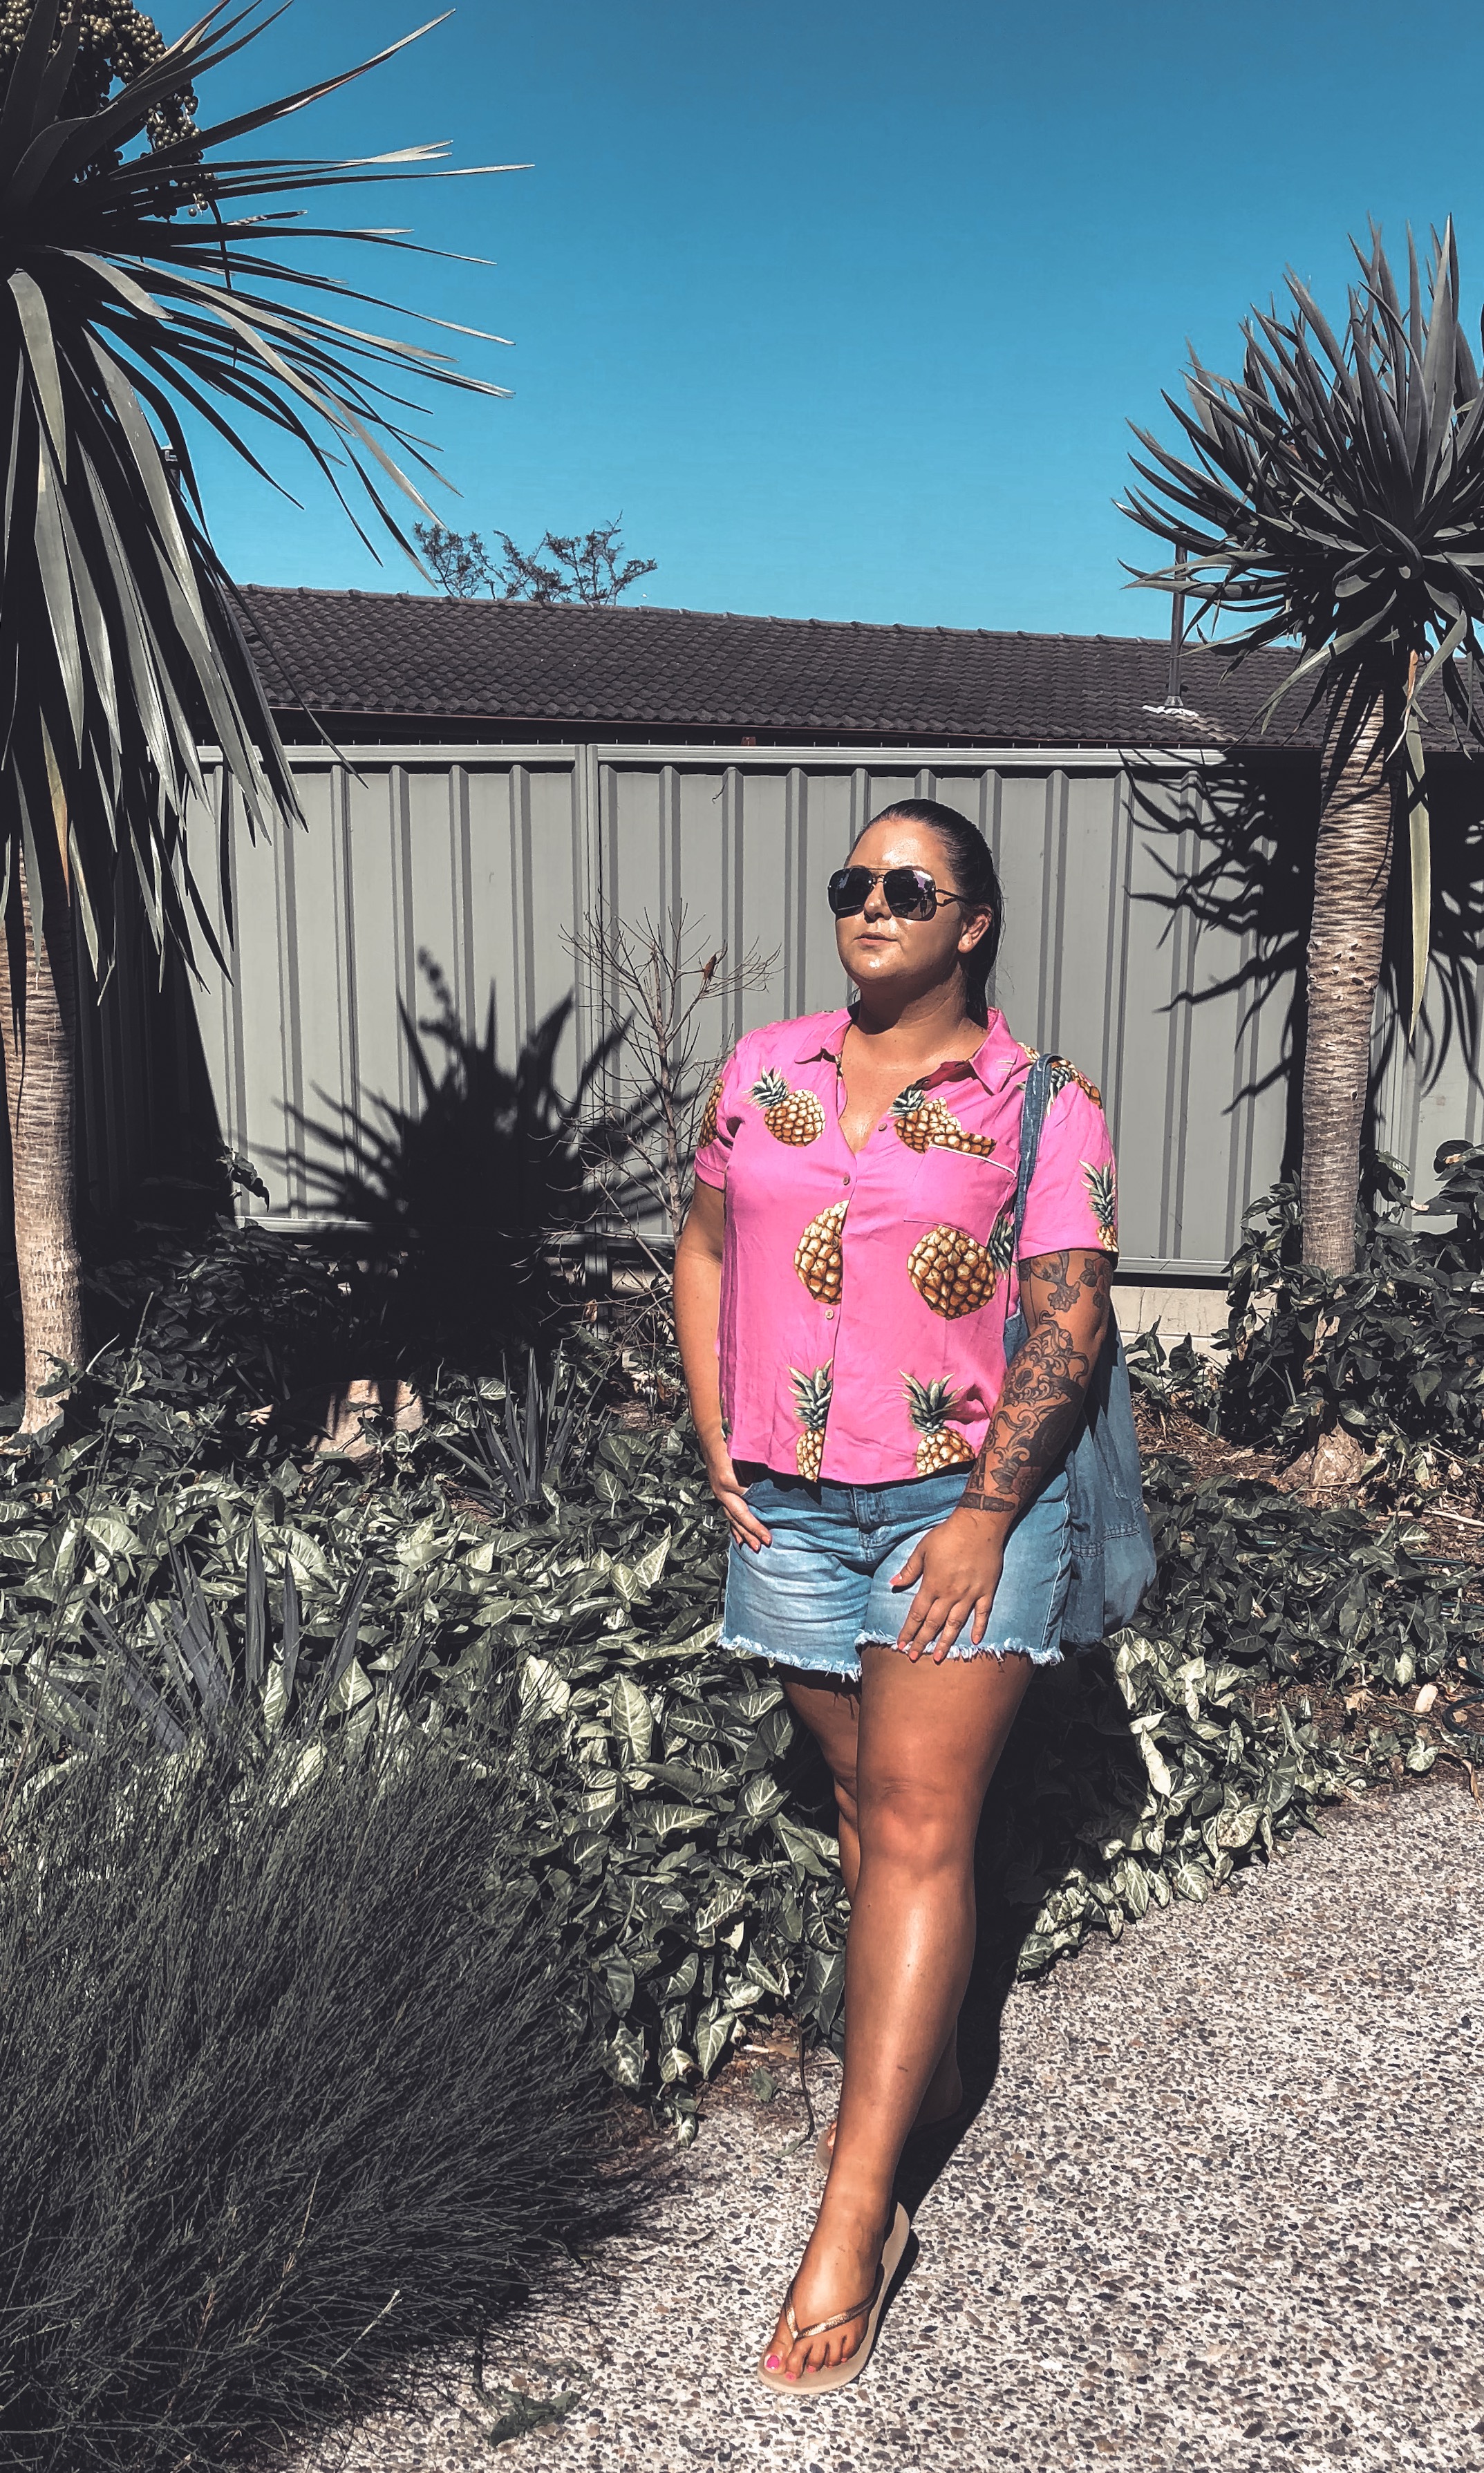 forever 21 plus size blouses